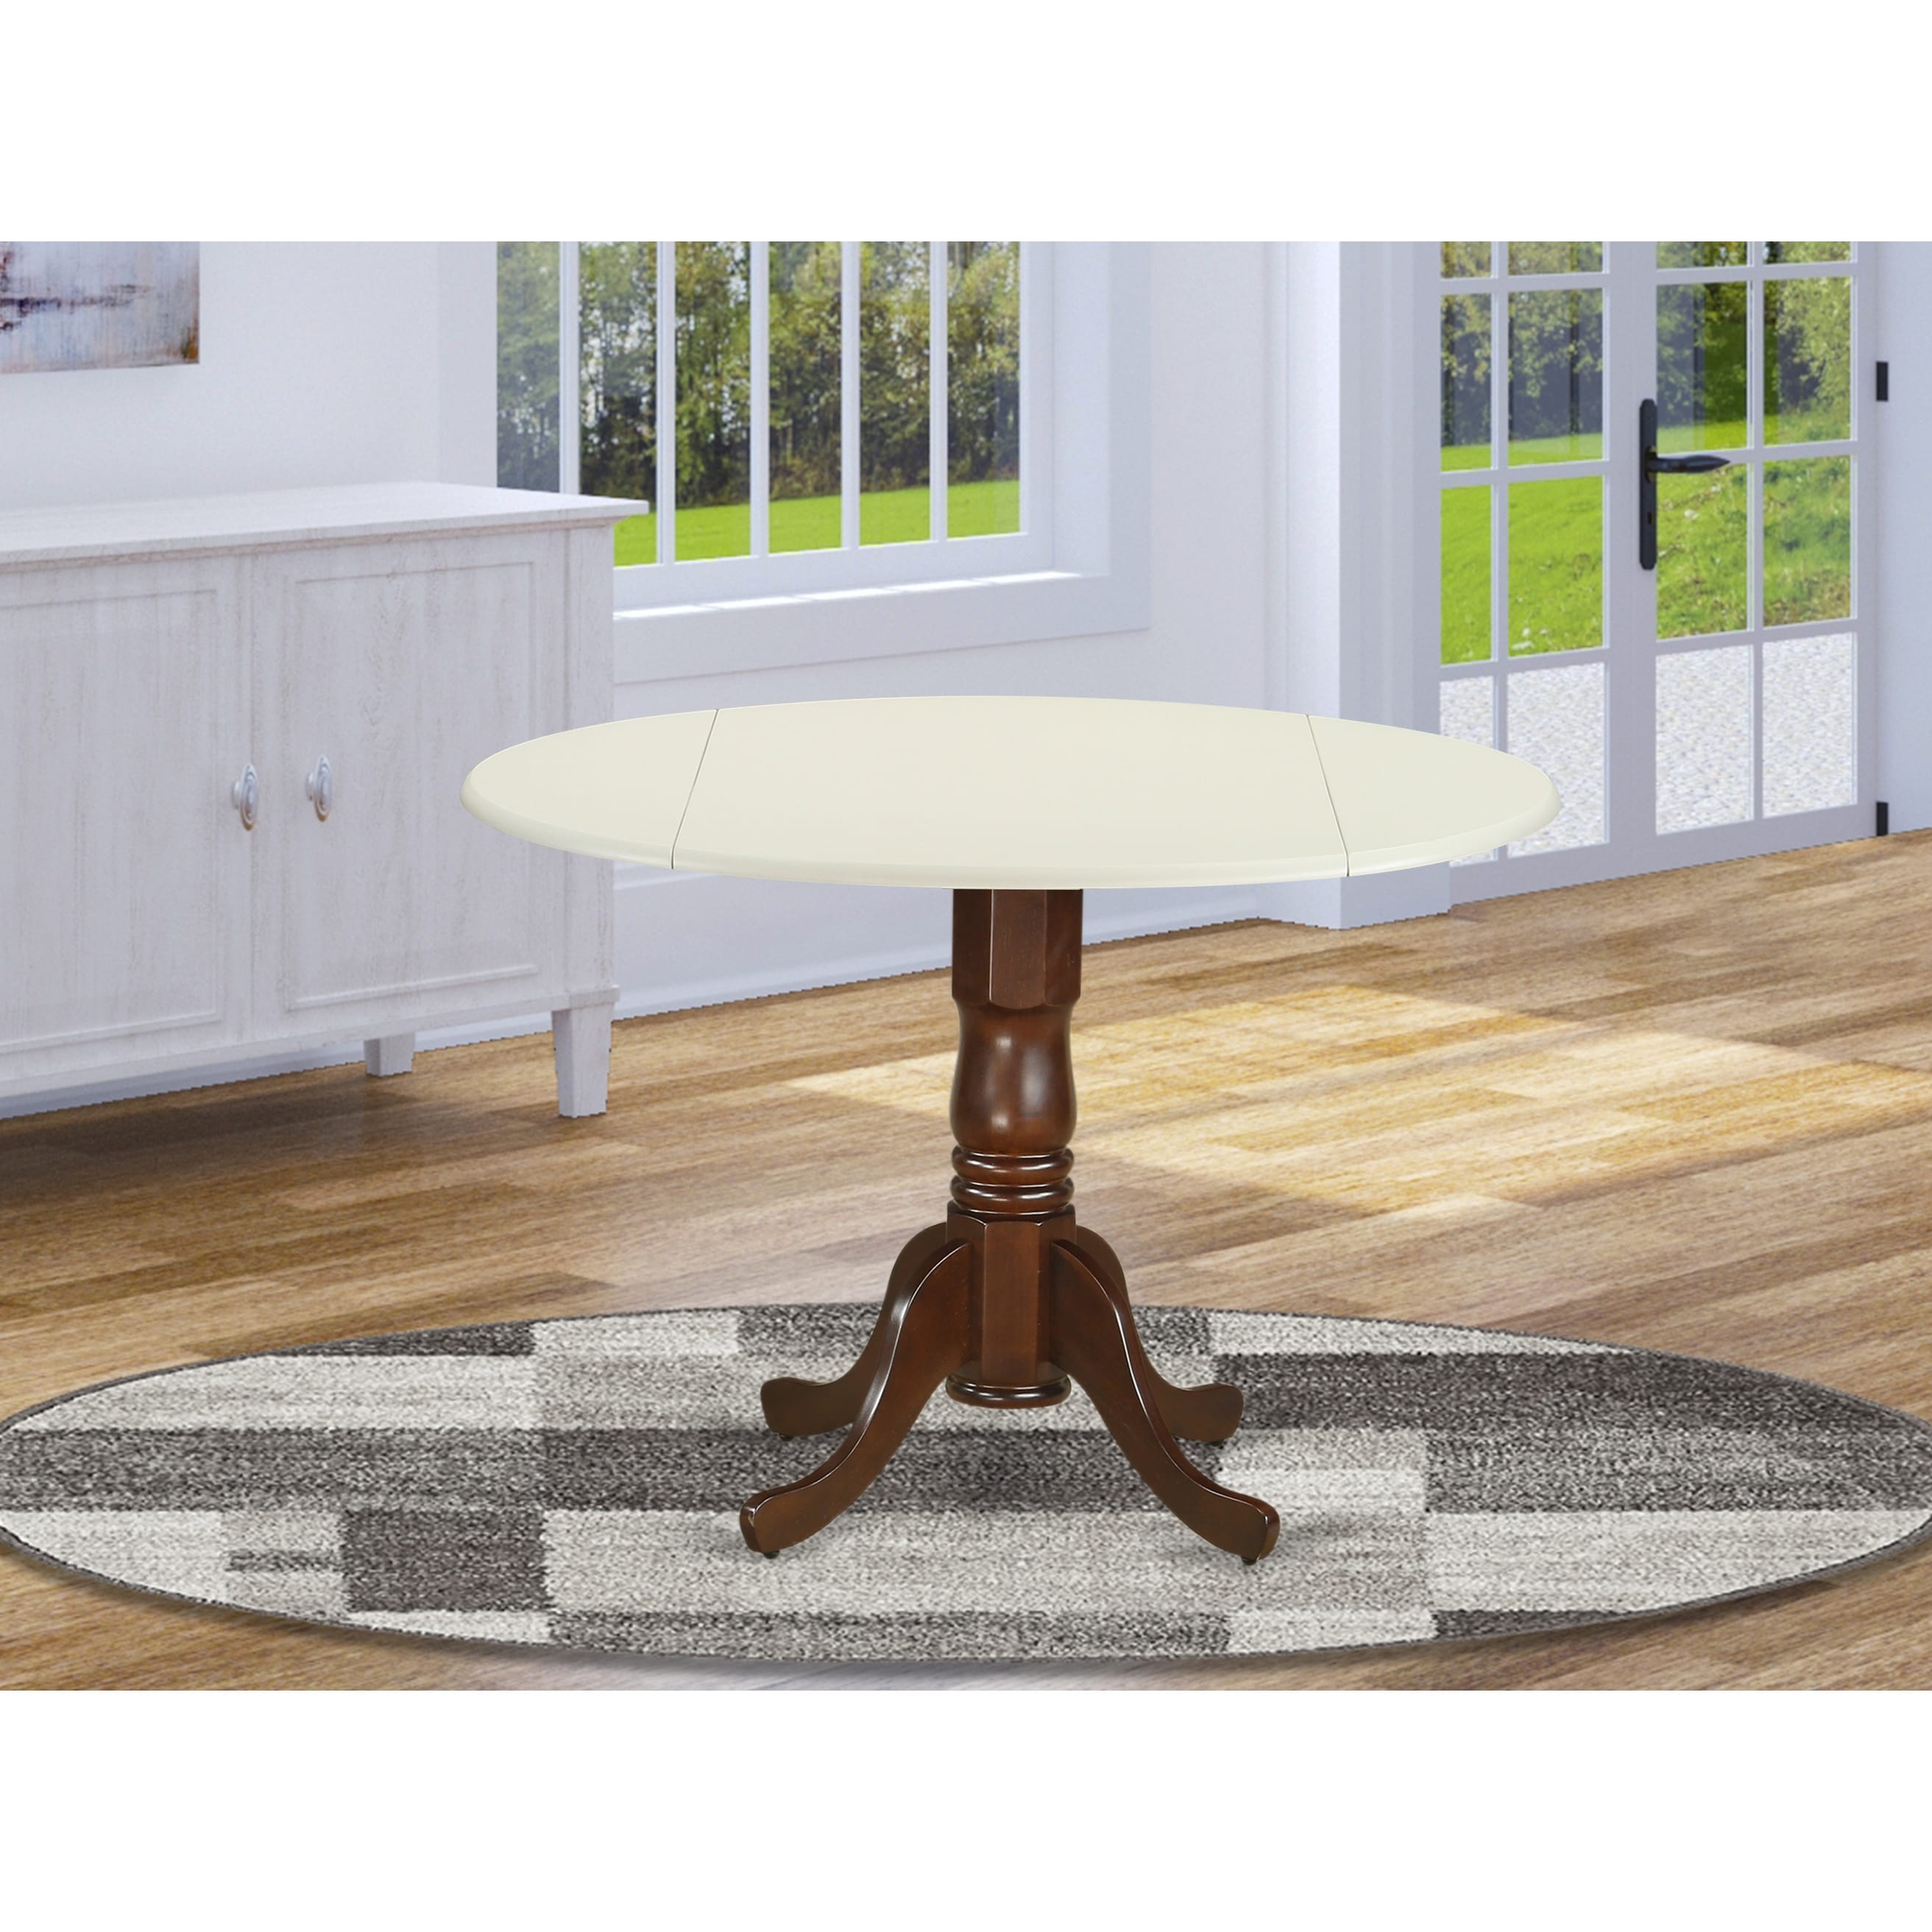 42" Round Dublin drop-leaf pedestal kitchen table in mahogany and black finish 